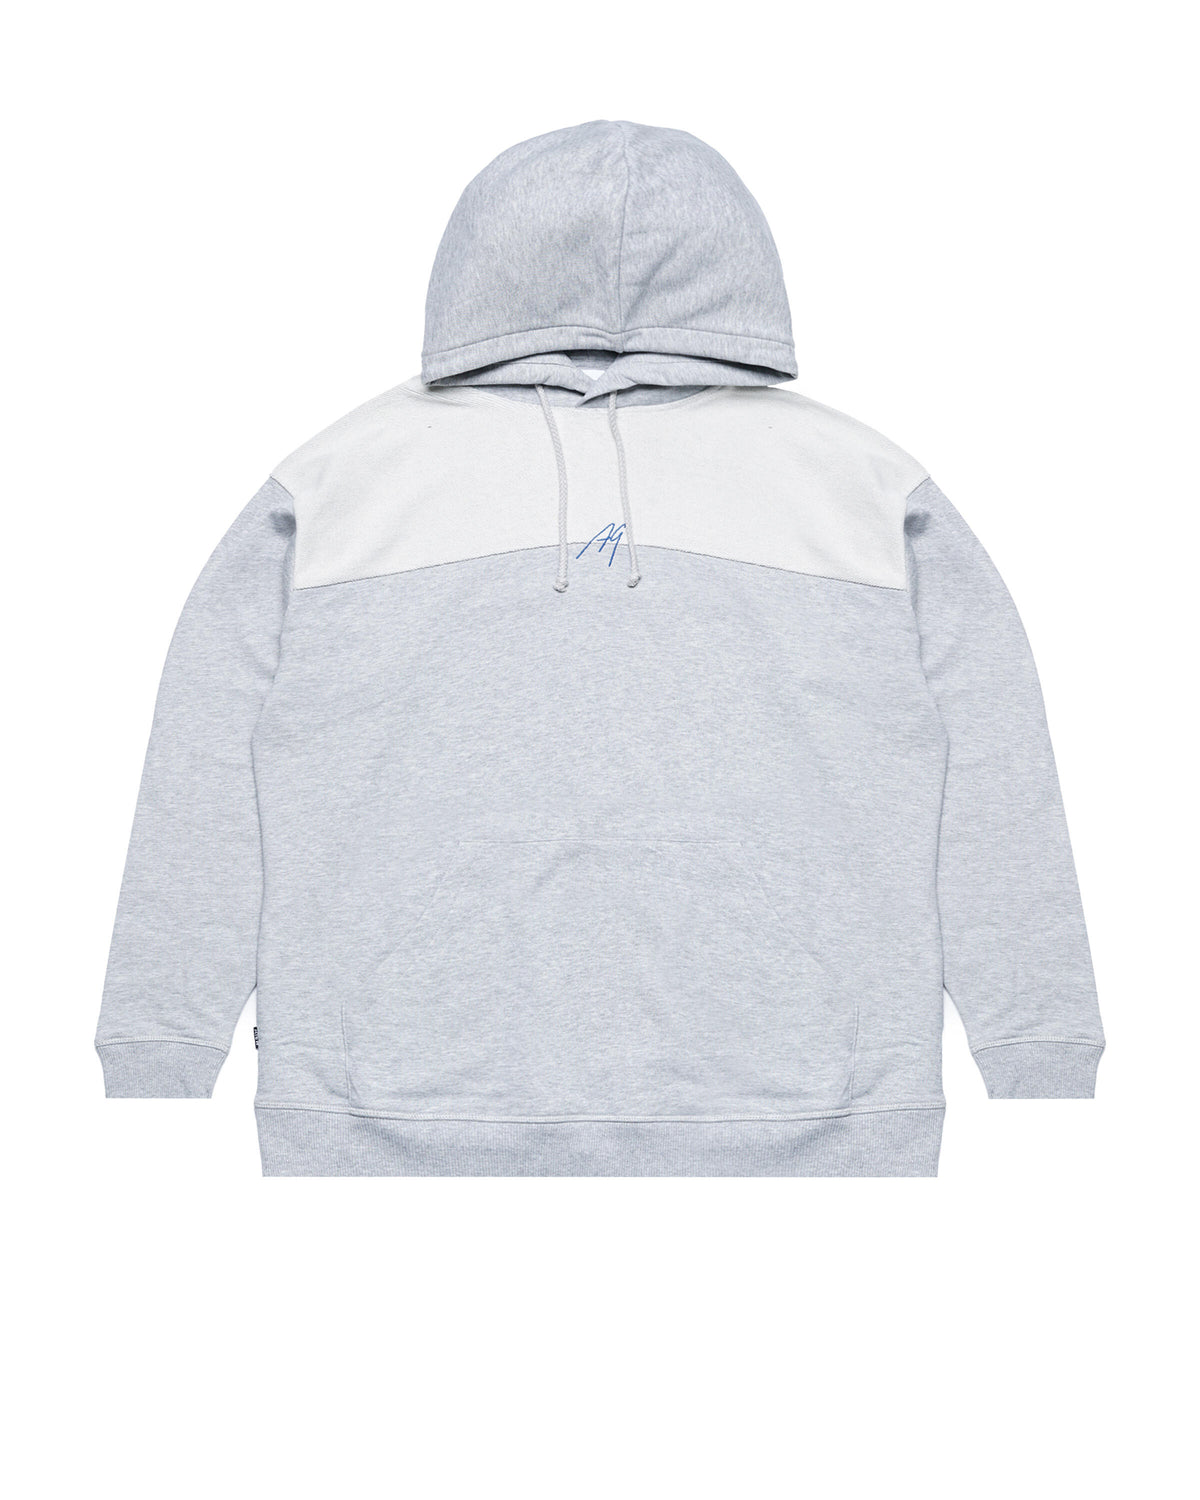 Afew Goods Made by Culture Hoody "Grey"